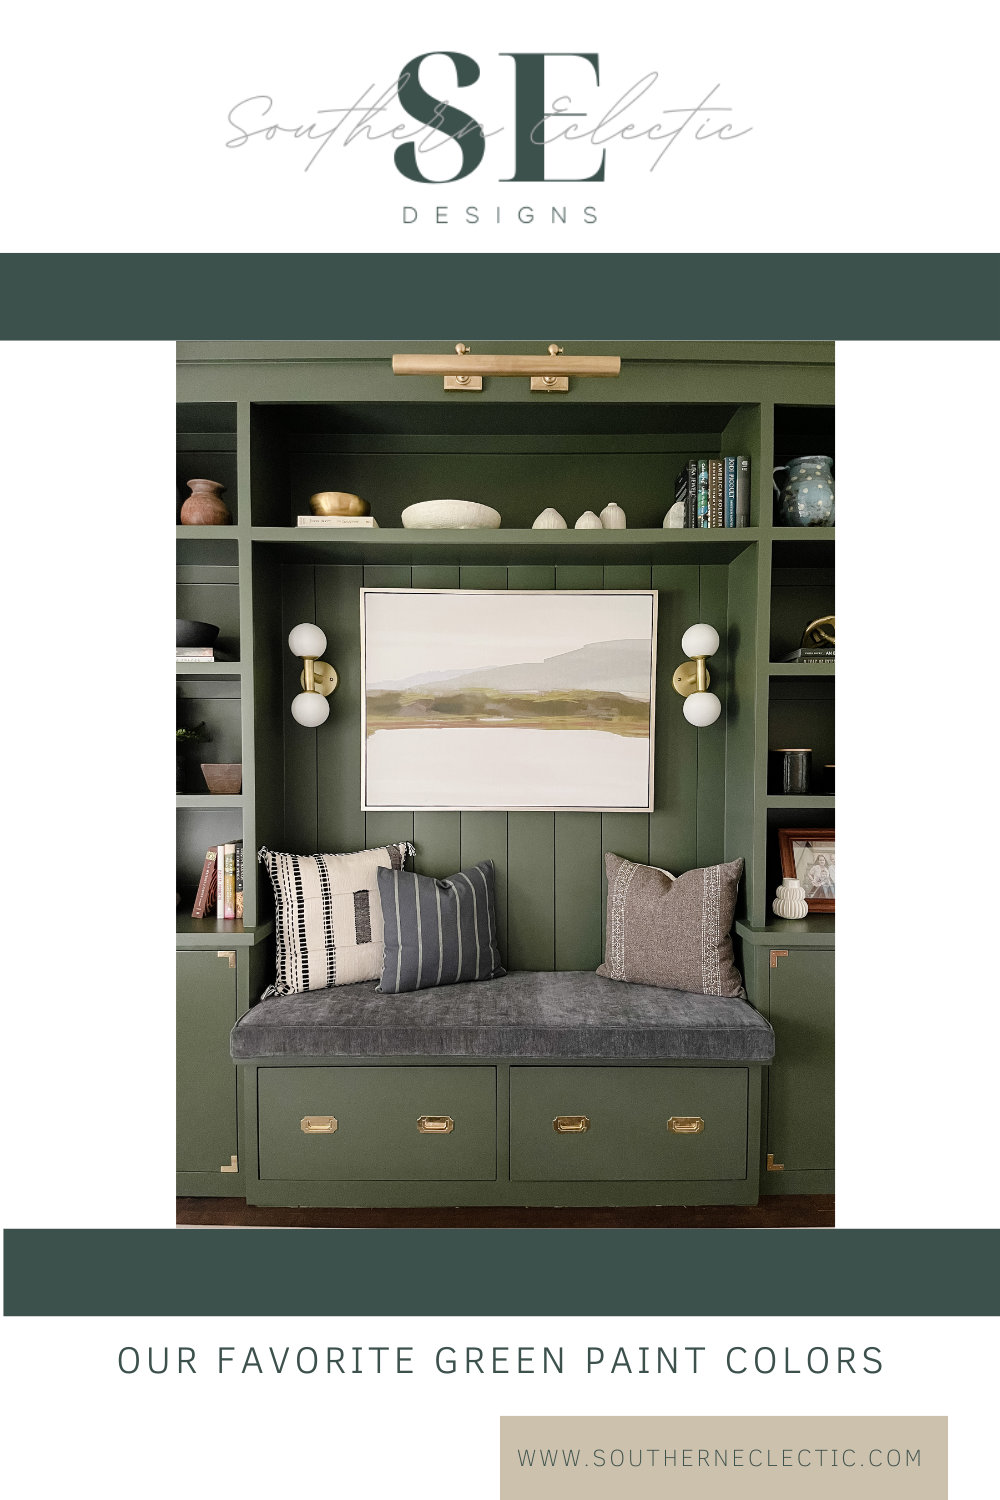 Southern Eclectic Designs | Interior Design |  Our Favorite Greens | Paint Swatches | Design | Green Interior Design | Home Design | Home Decor | 